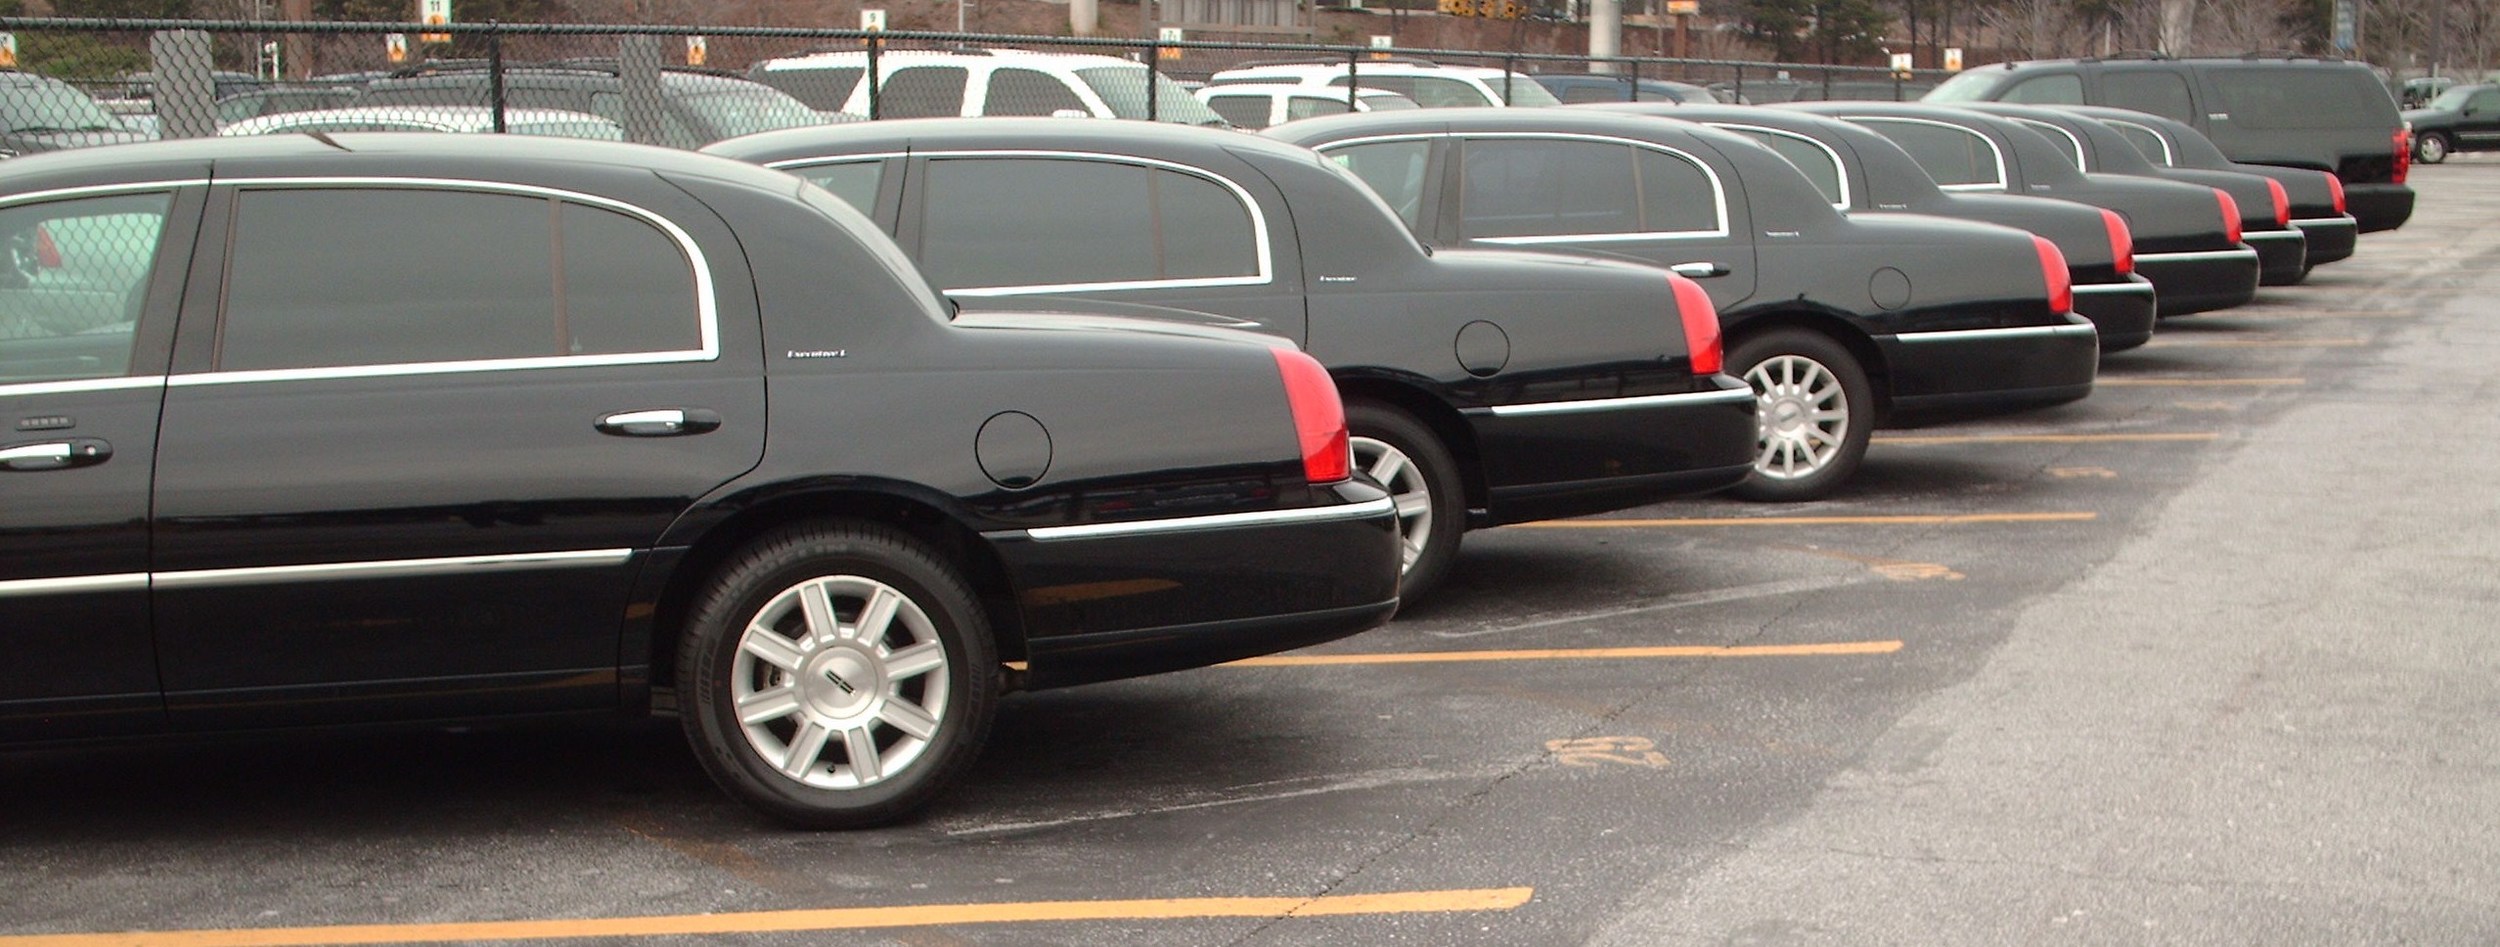 Union Limousine Provides Luxurious Group Transportation Service in New York City